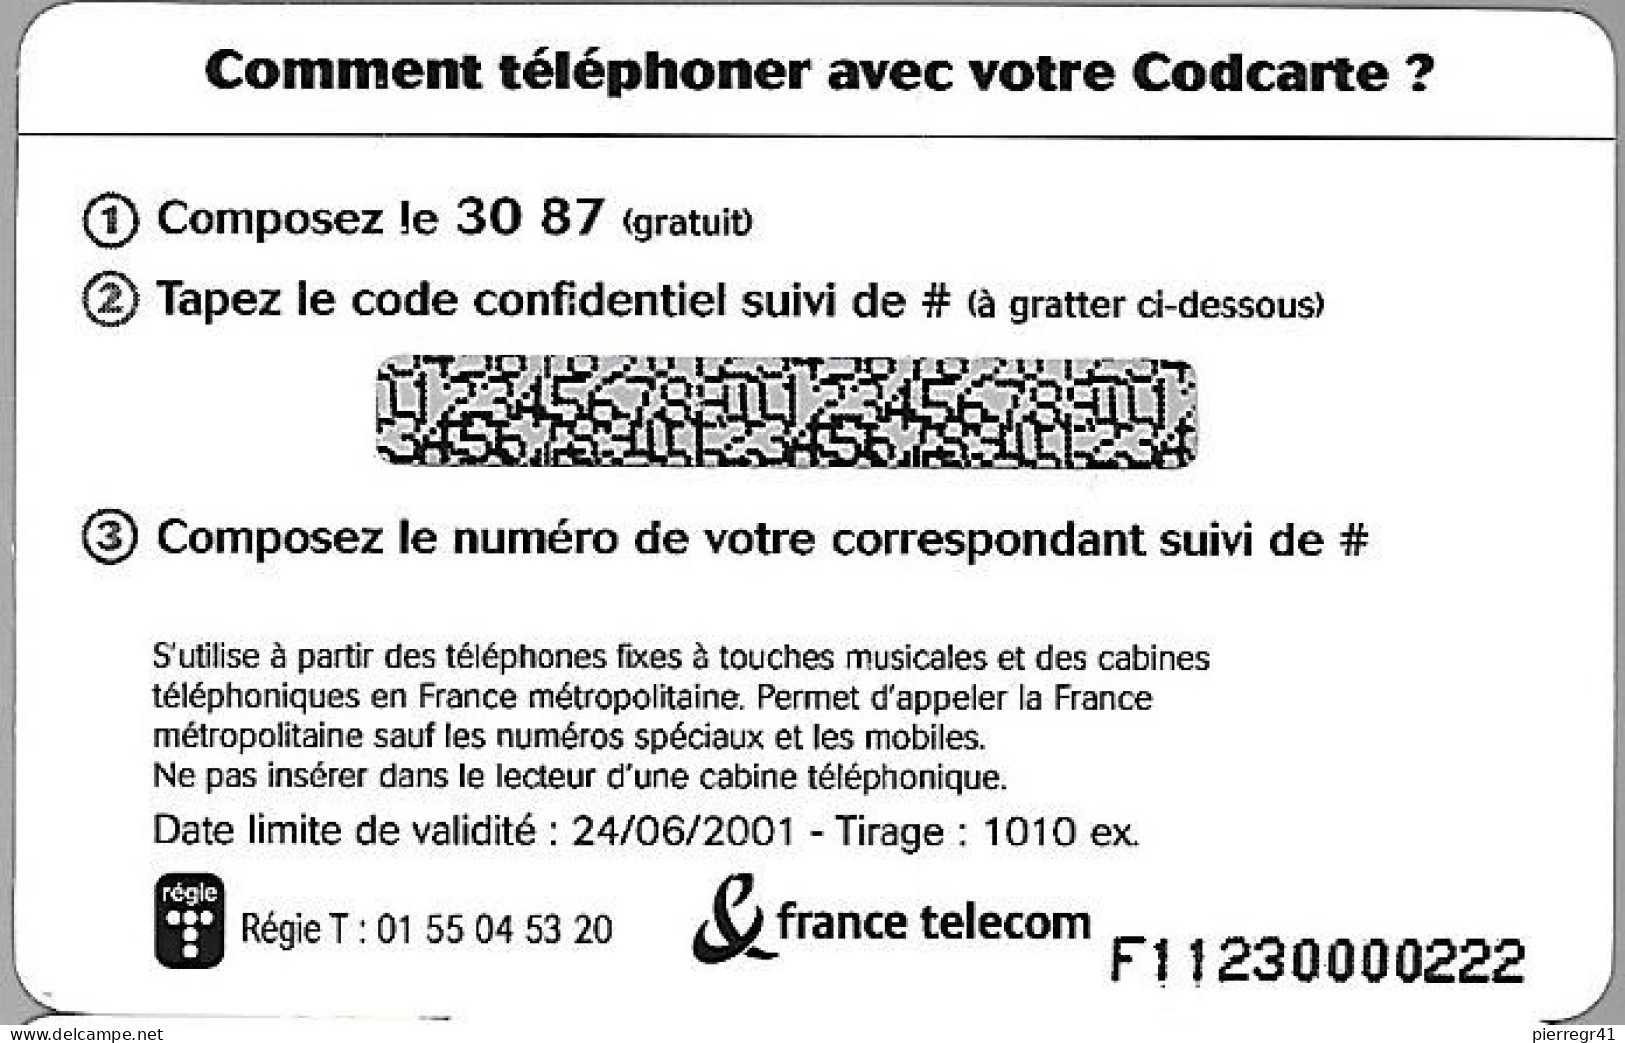 CODECARD-FT-3MN-GRATUITES -RENAULT CLIO-24/06/2001-1010 Ex-T BE - Tickets FT